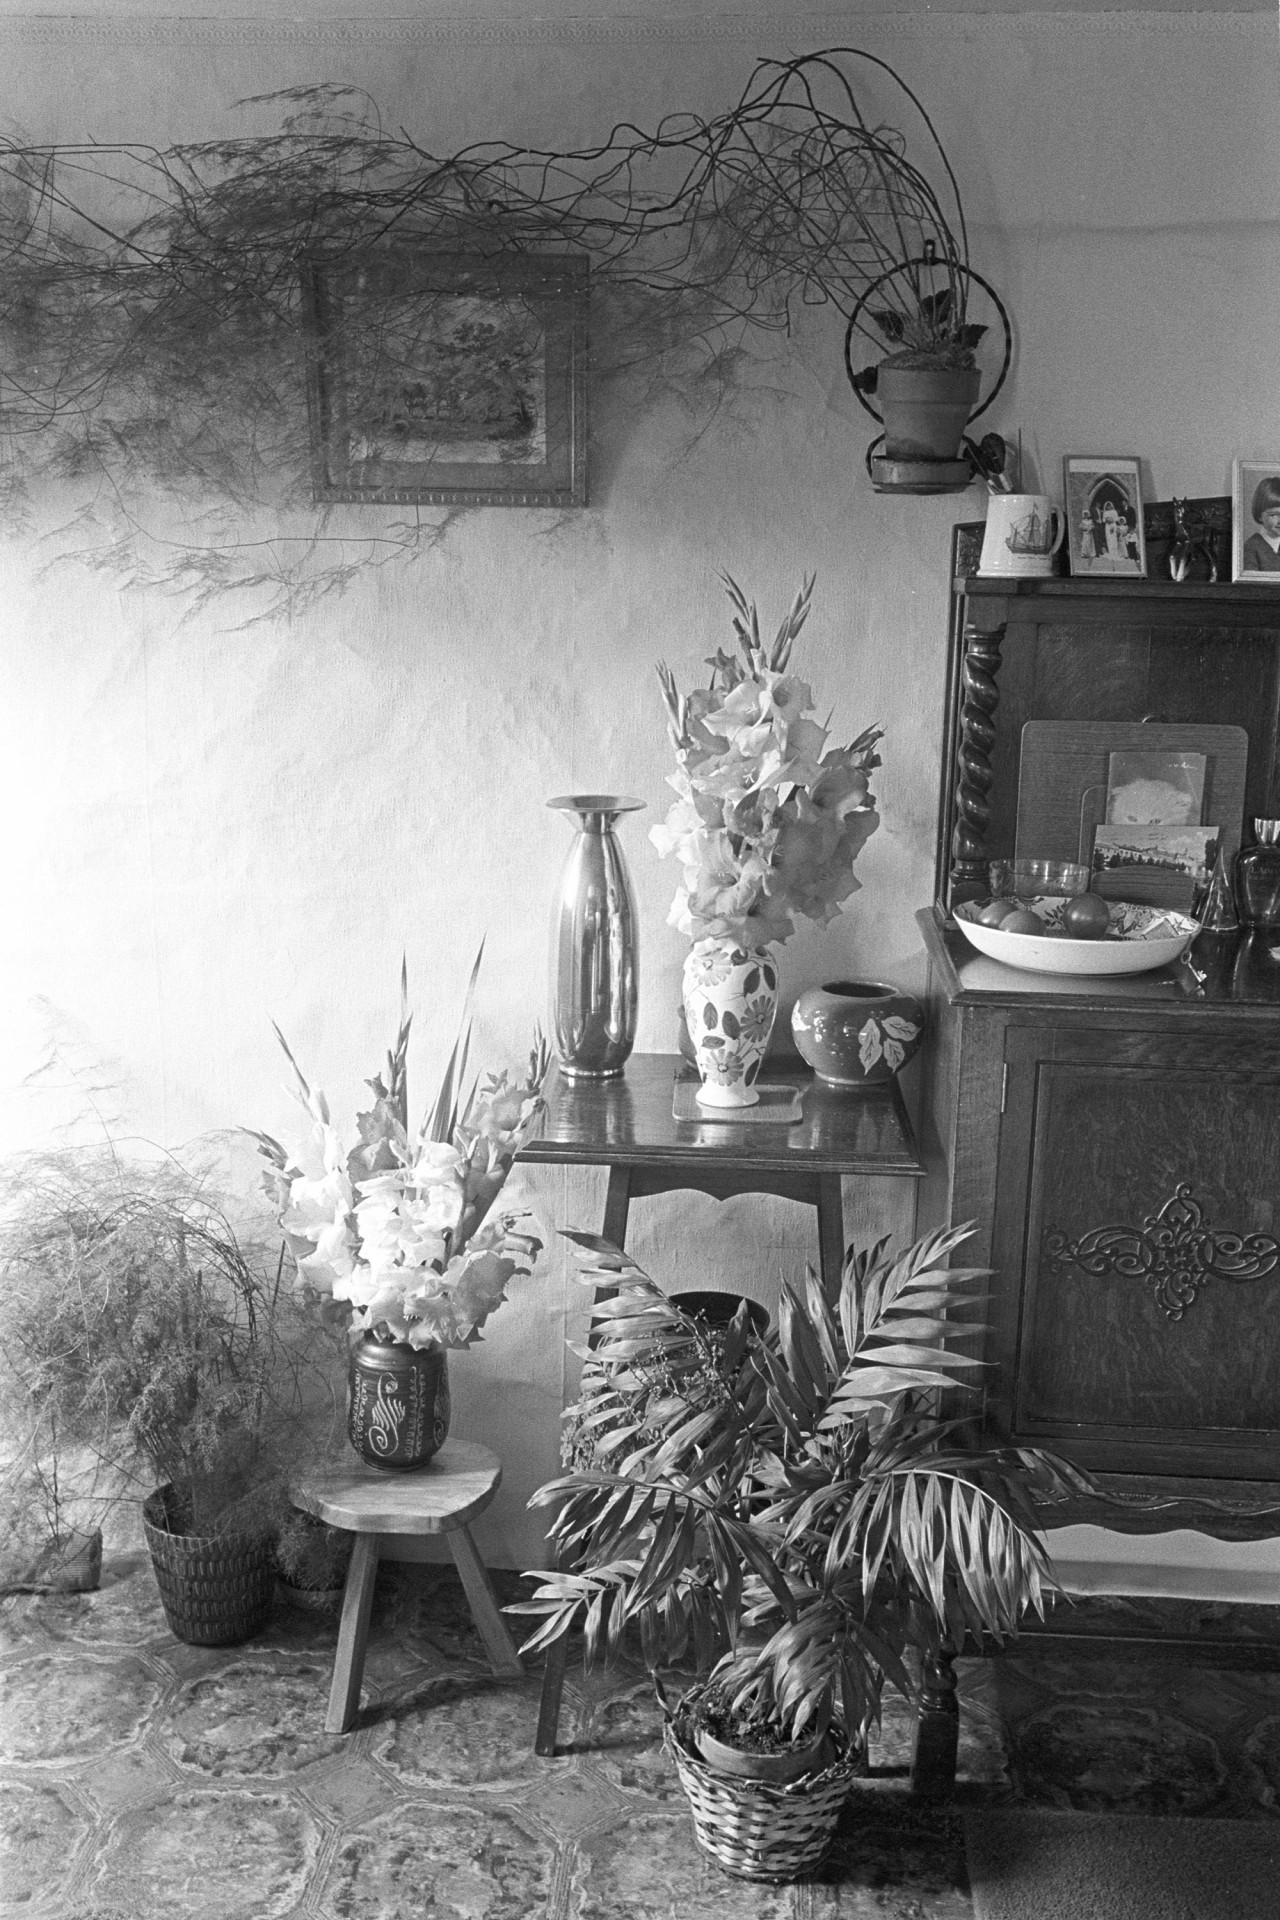 Cottage interior, side table with ornaments and flowers. 
[The interior of a cottage in Monkokehampton with a wooden side table and various pot plants and flowers in vases. One pot plant is mounted on the wall by a framed picture.]